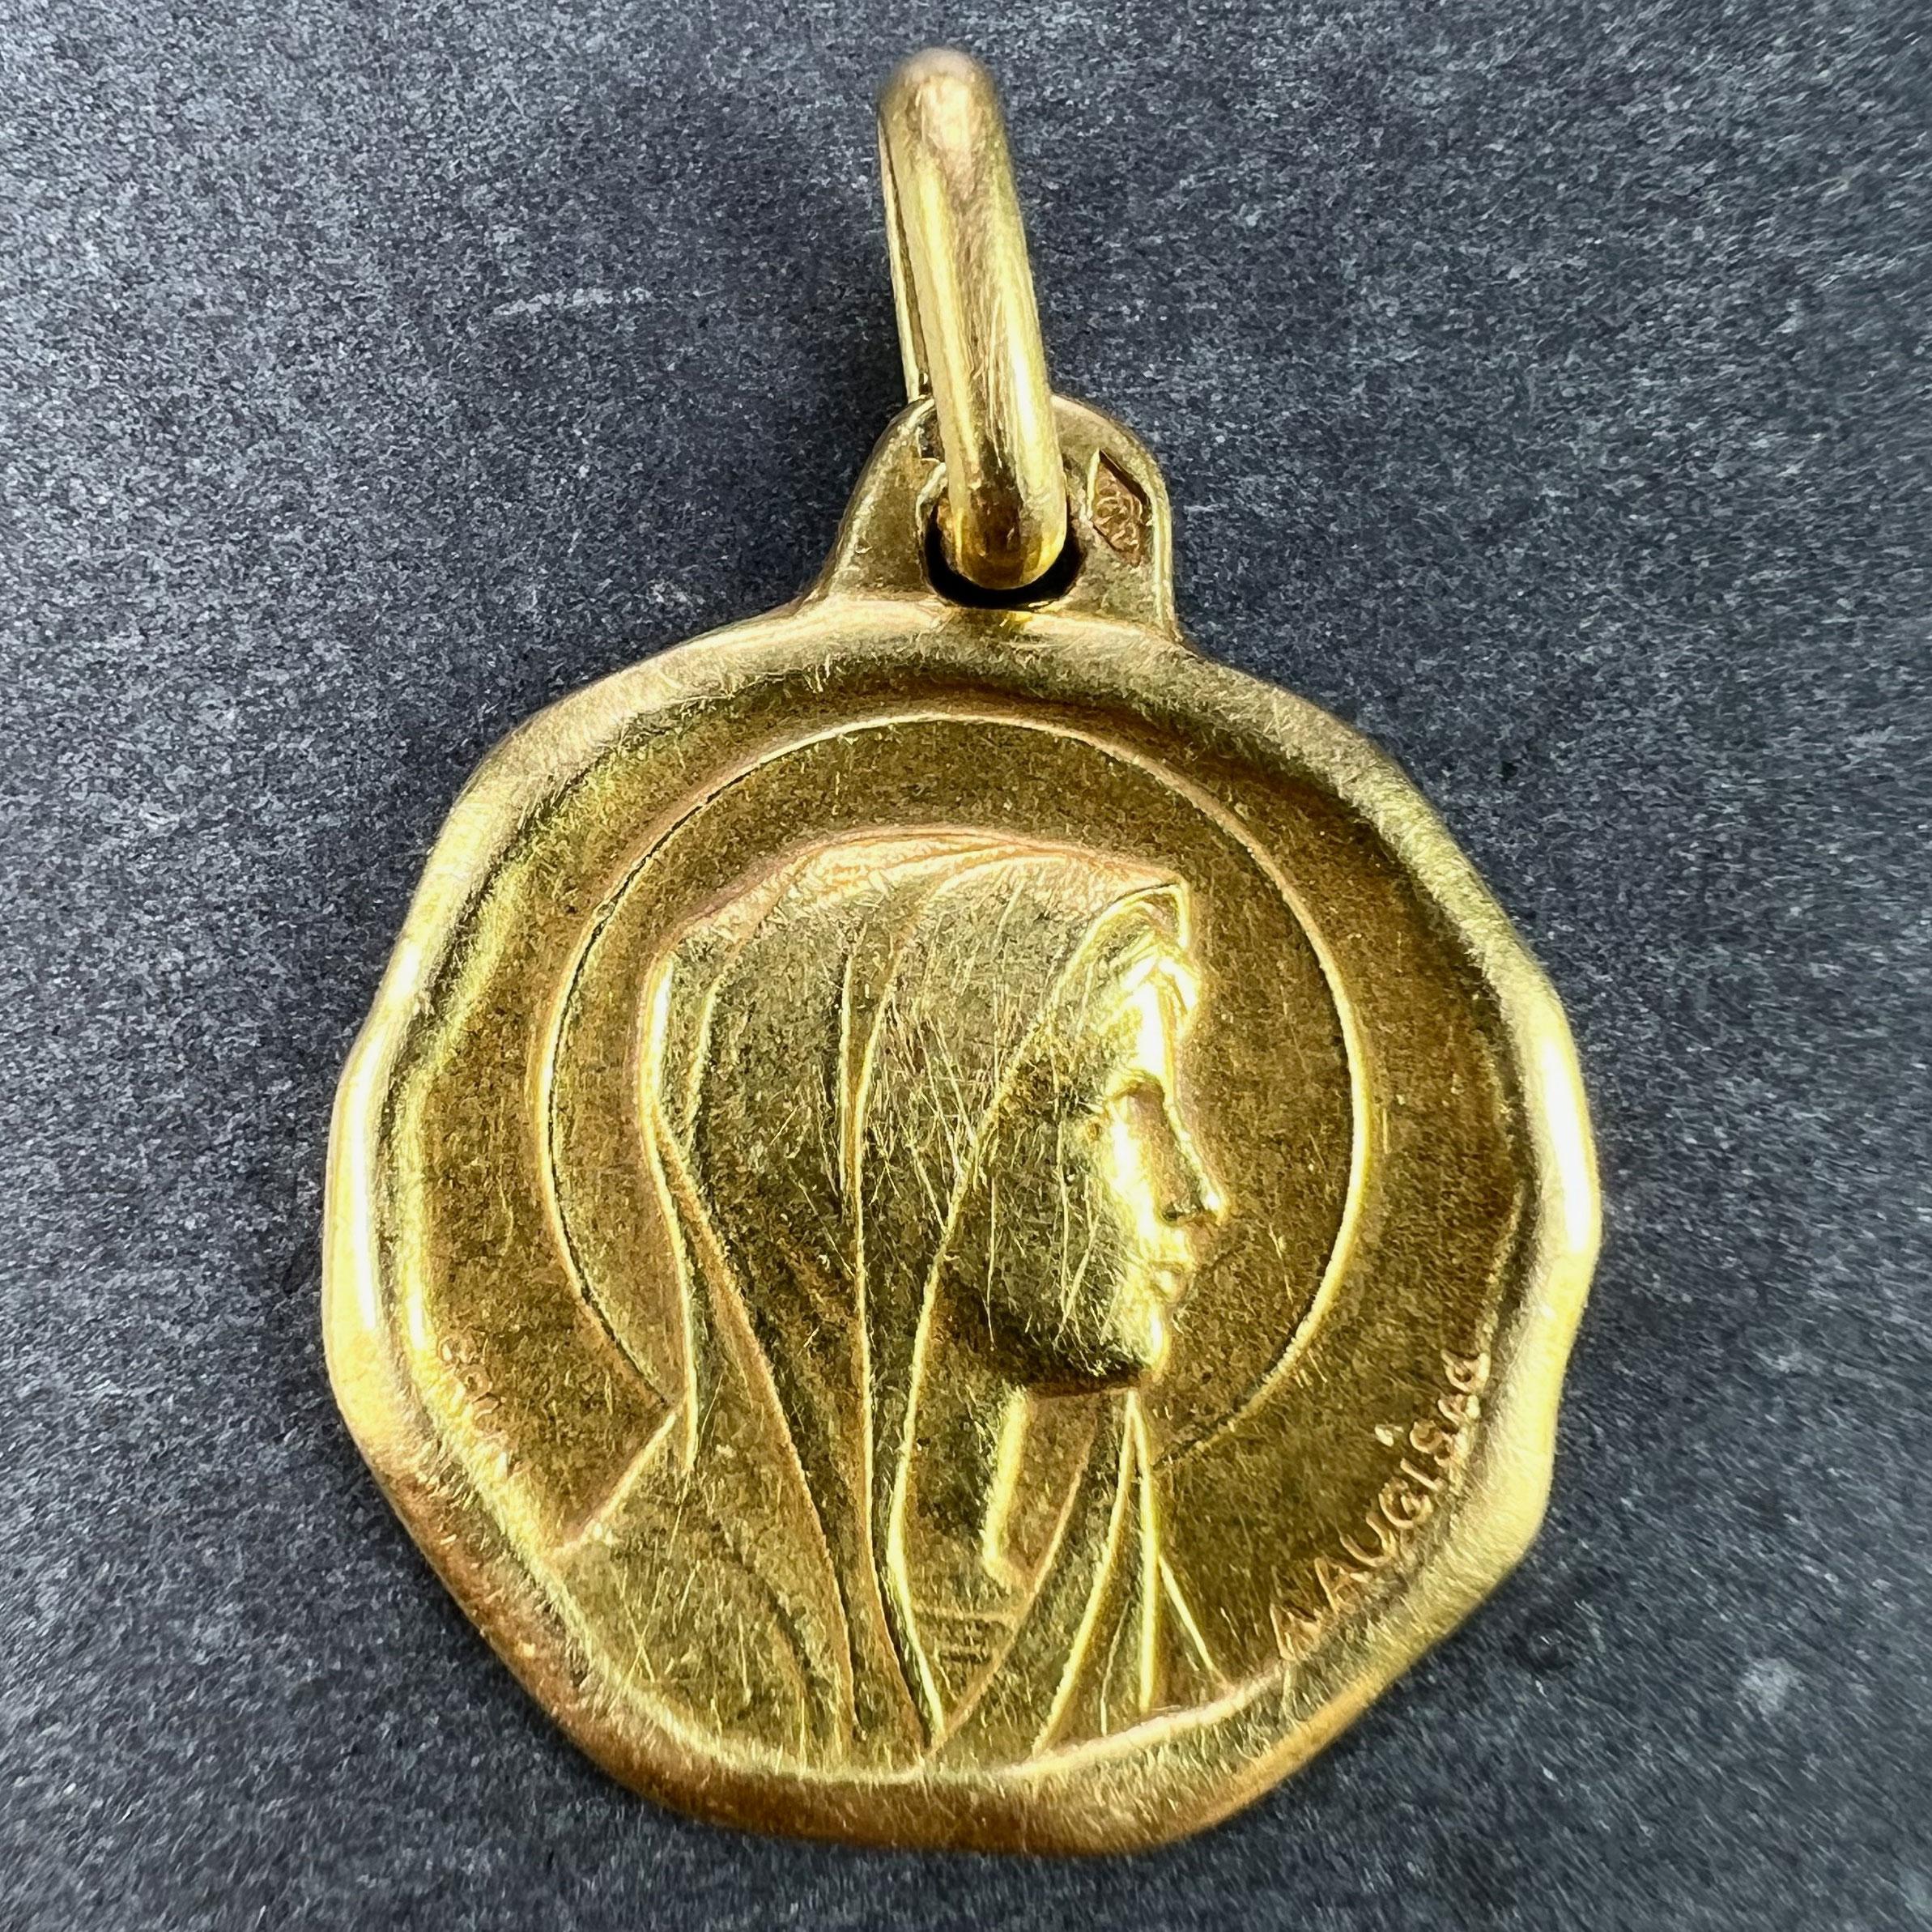 A French 18 karat (18K) yellow gold charm pendant or medal designed by Grun for Augis depicting the Virgin Mary. Stamped with the eagle's head for French manufacture, Augis' makers mark, and signed A. Augis and Grun.

Dimensions: 2.2 x 1.9 x 0.1 cm